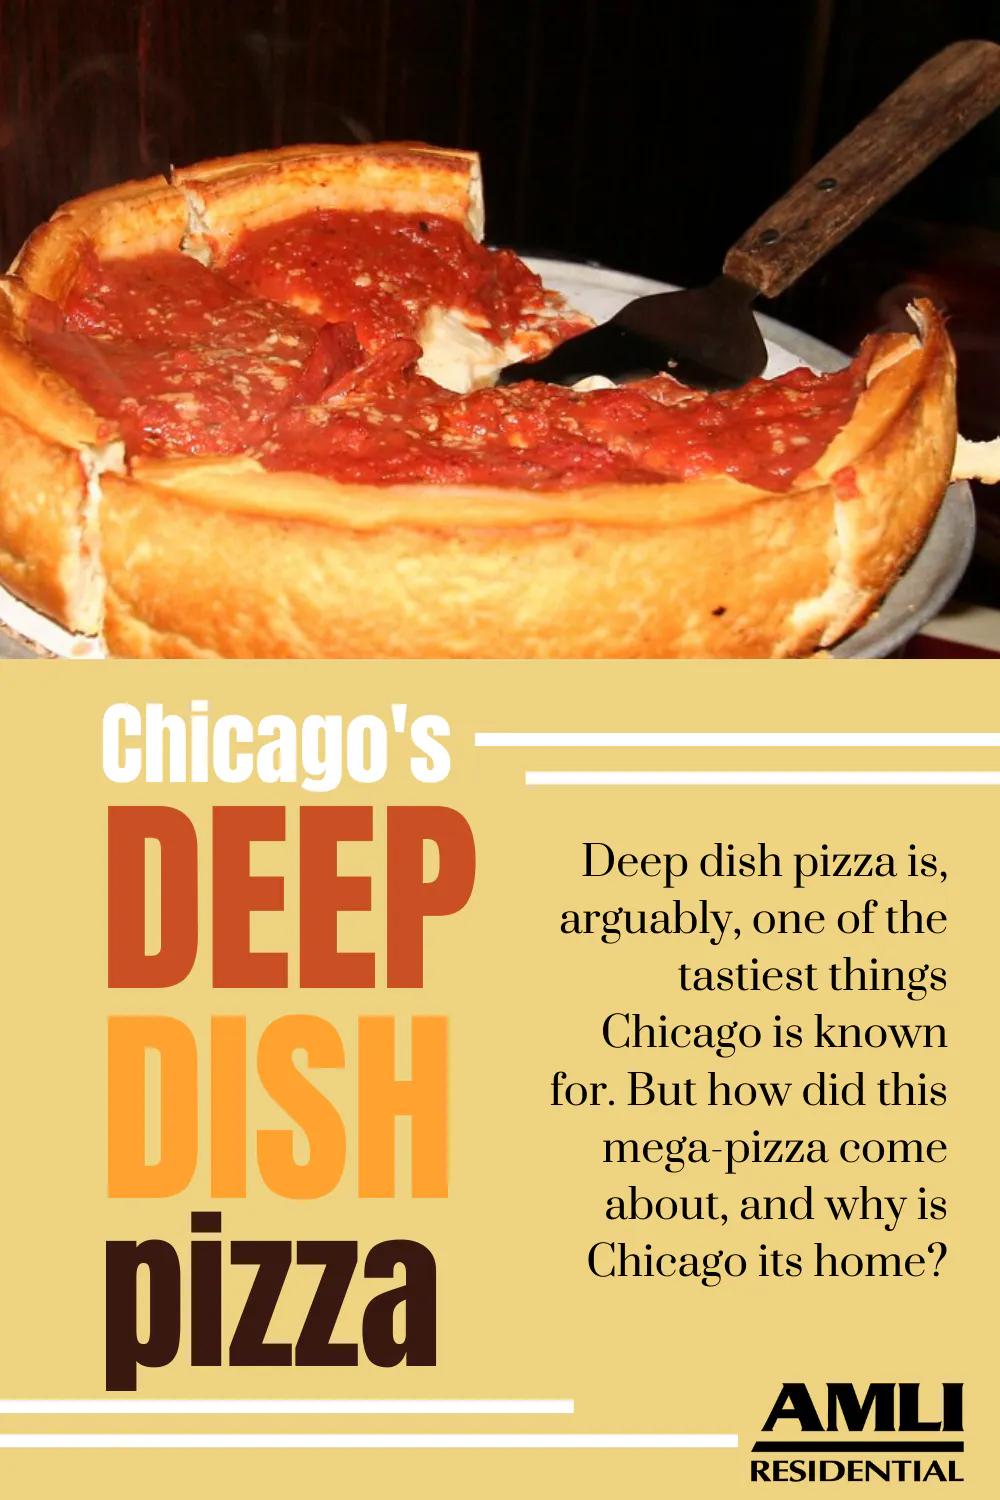 chicago pizza history - Who is the founder of Chicago's pizza